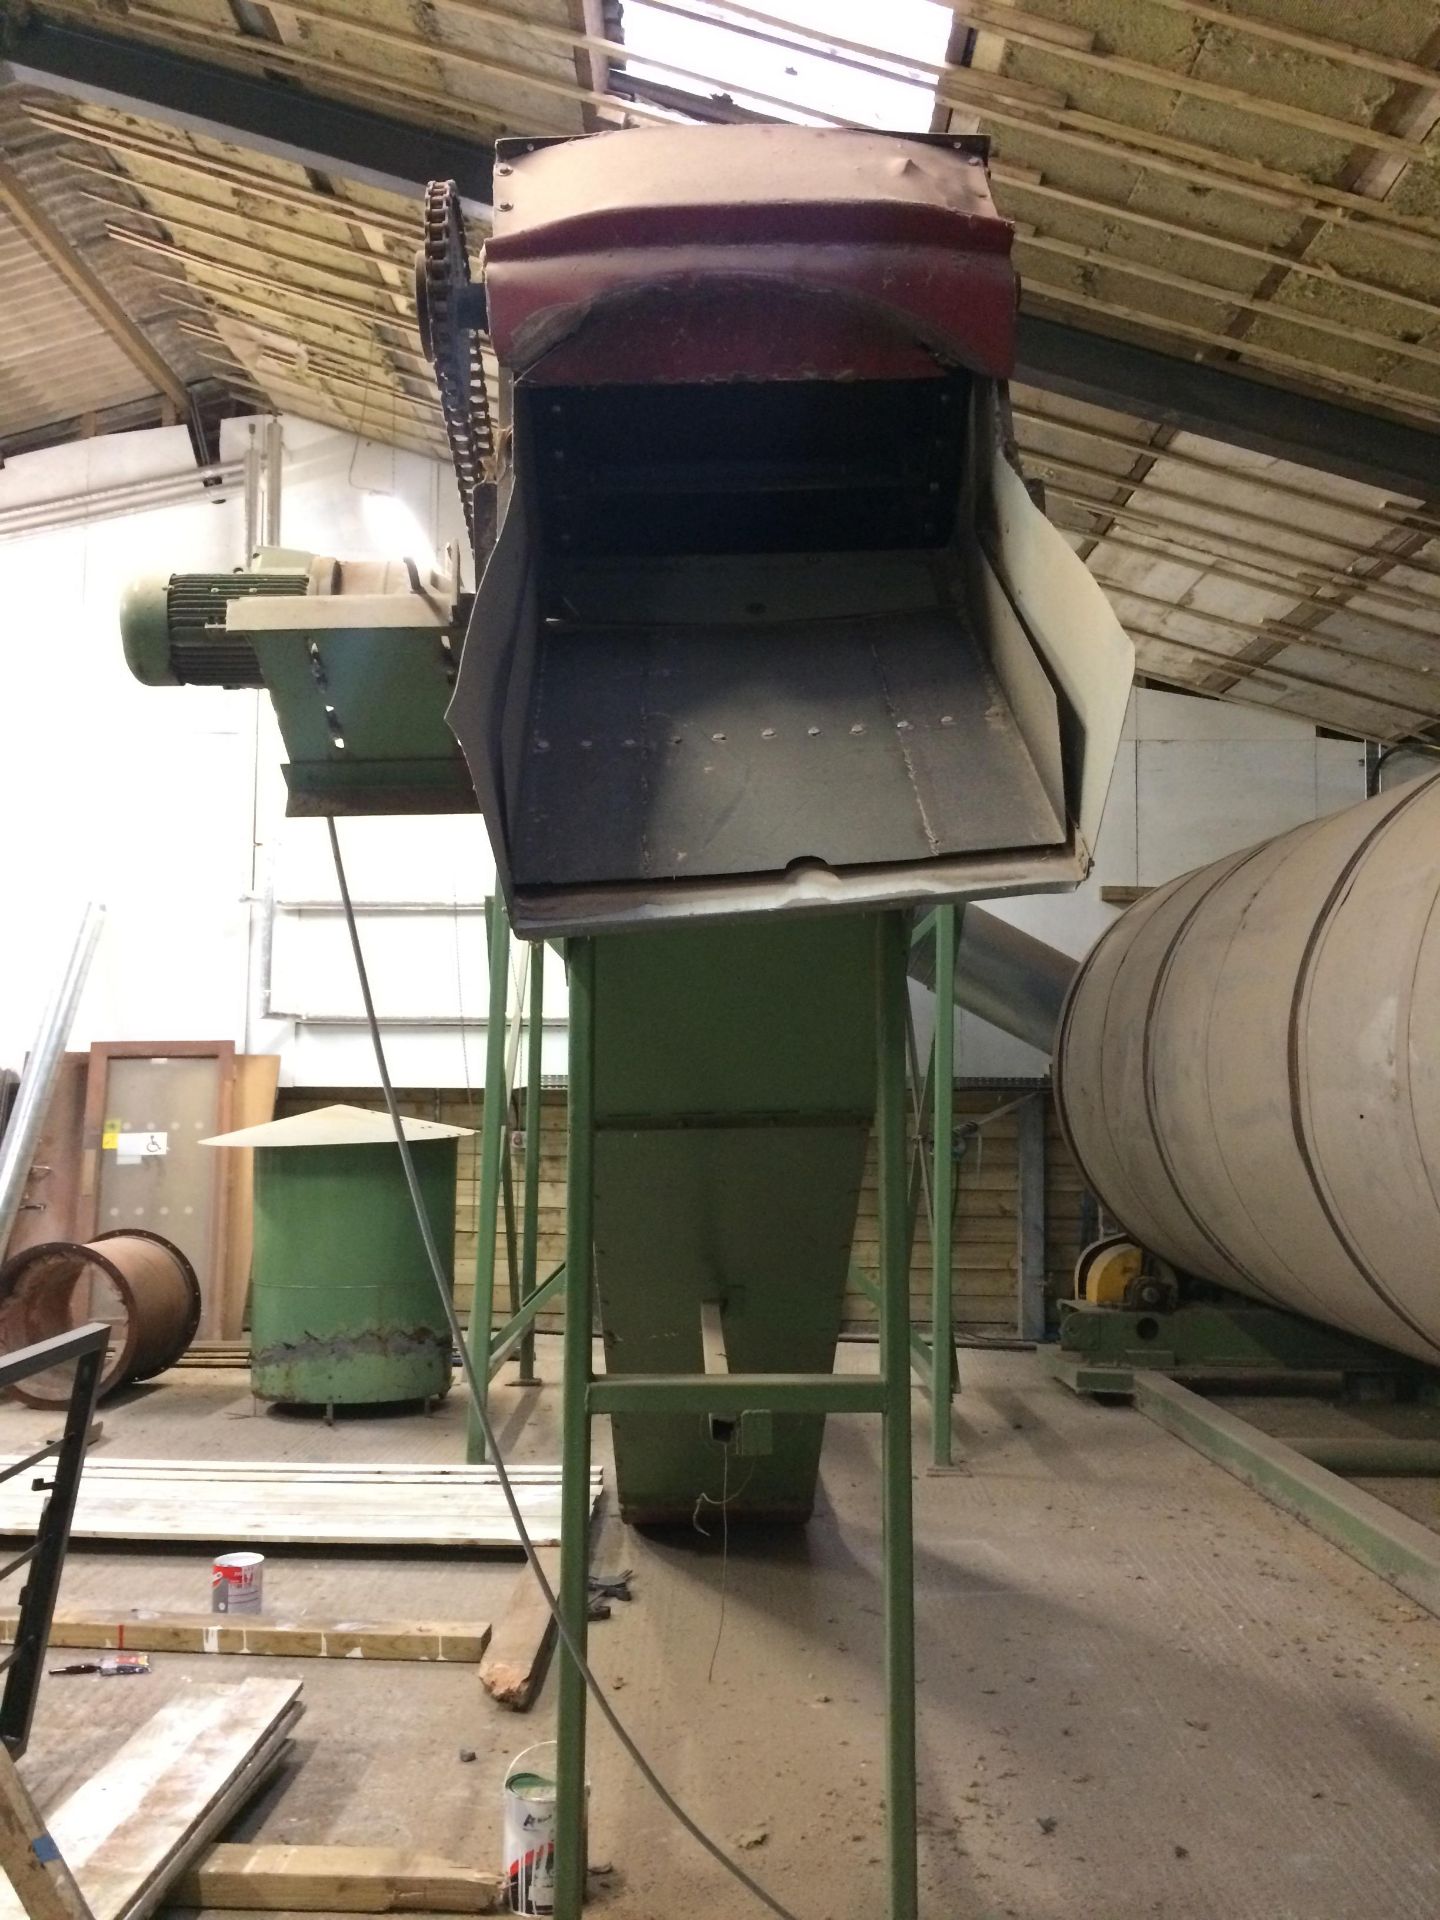 SAWDUST / WOOD PELLET PLANT DRYING SYSTEM + 25 ITEMS TO BE SOLD AS A JOB LOT *PLUS VAT* - Image 35 of 79